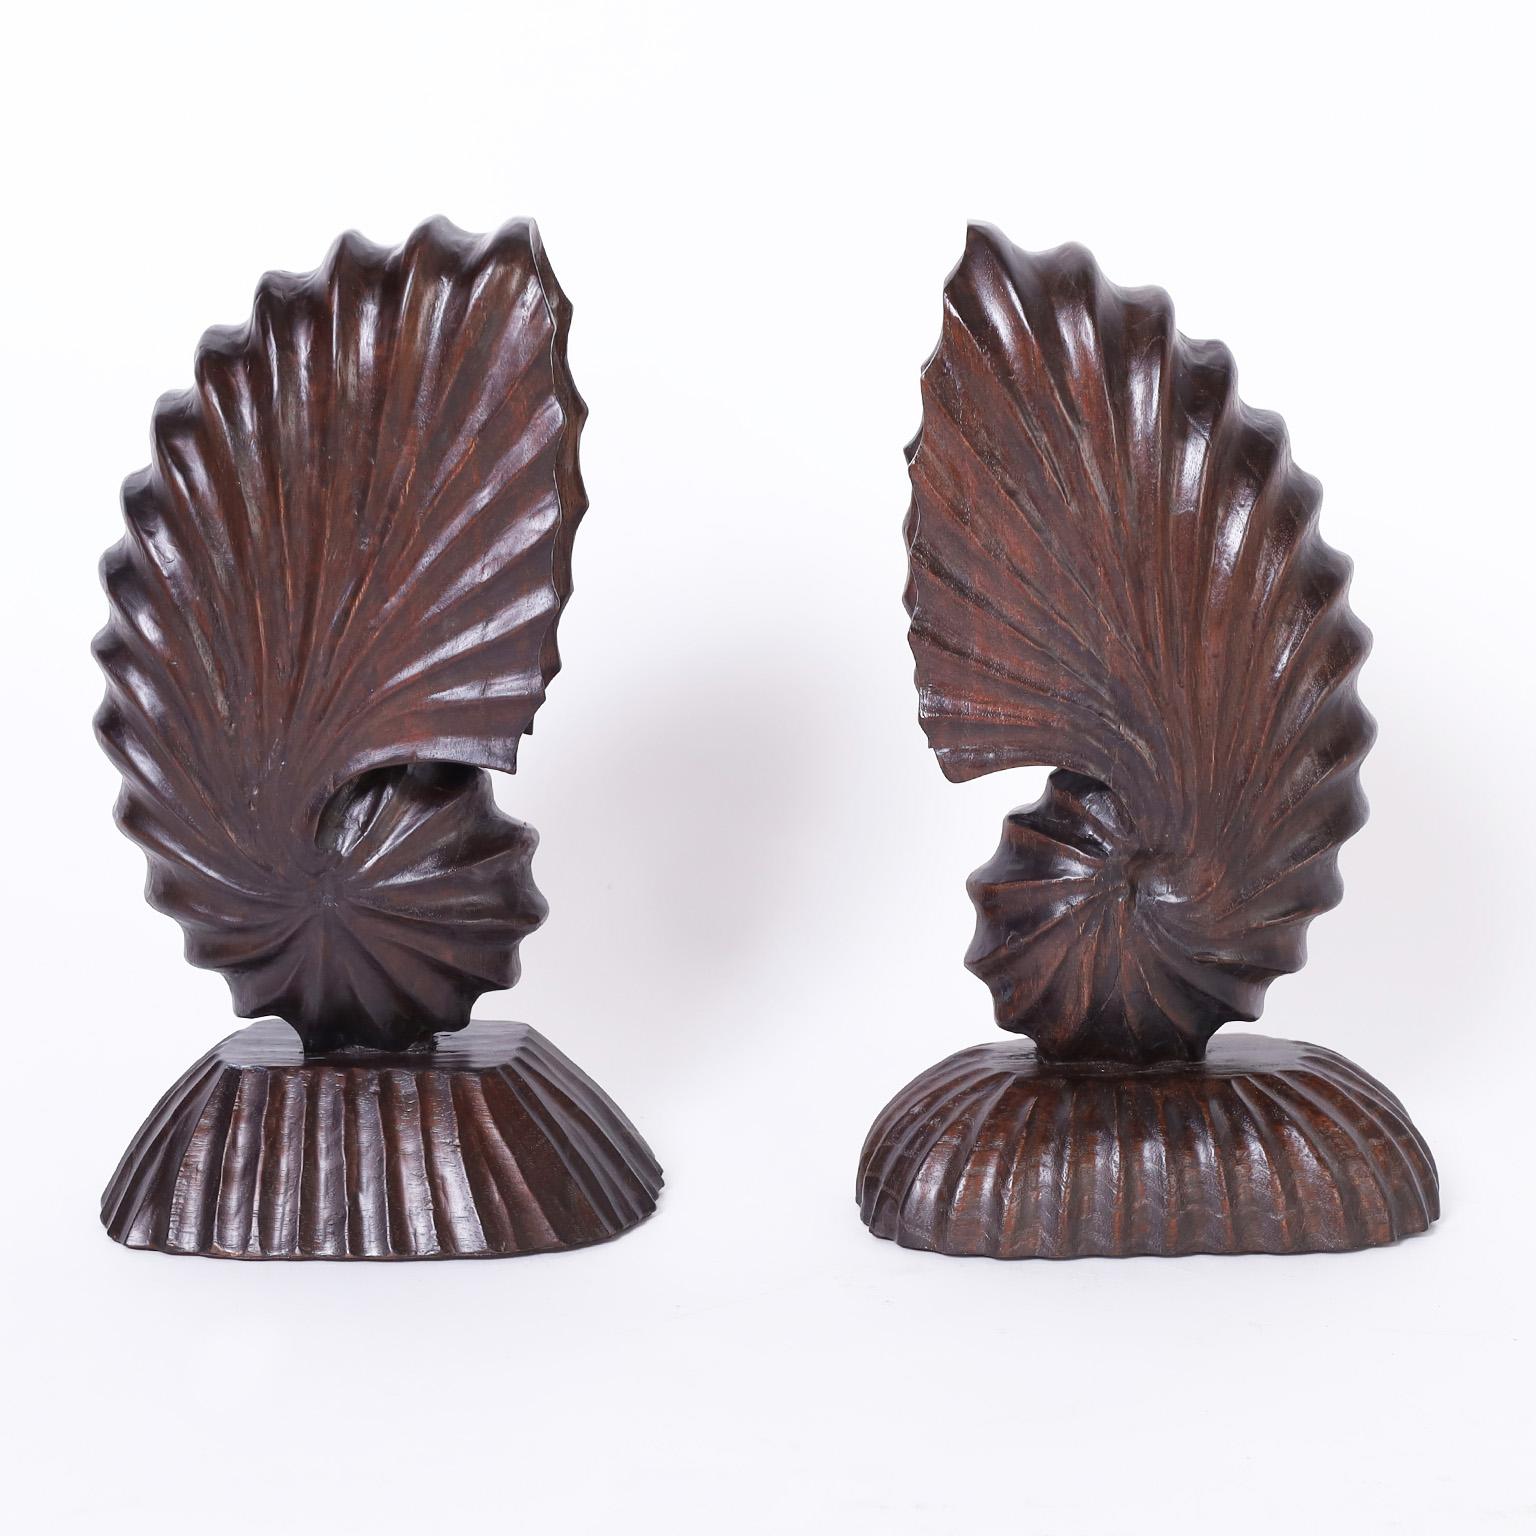 Pair of Carved Wood Nautilus Shells